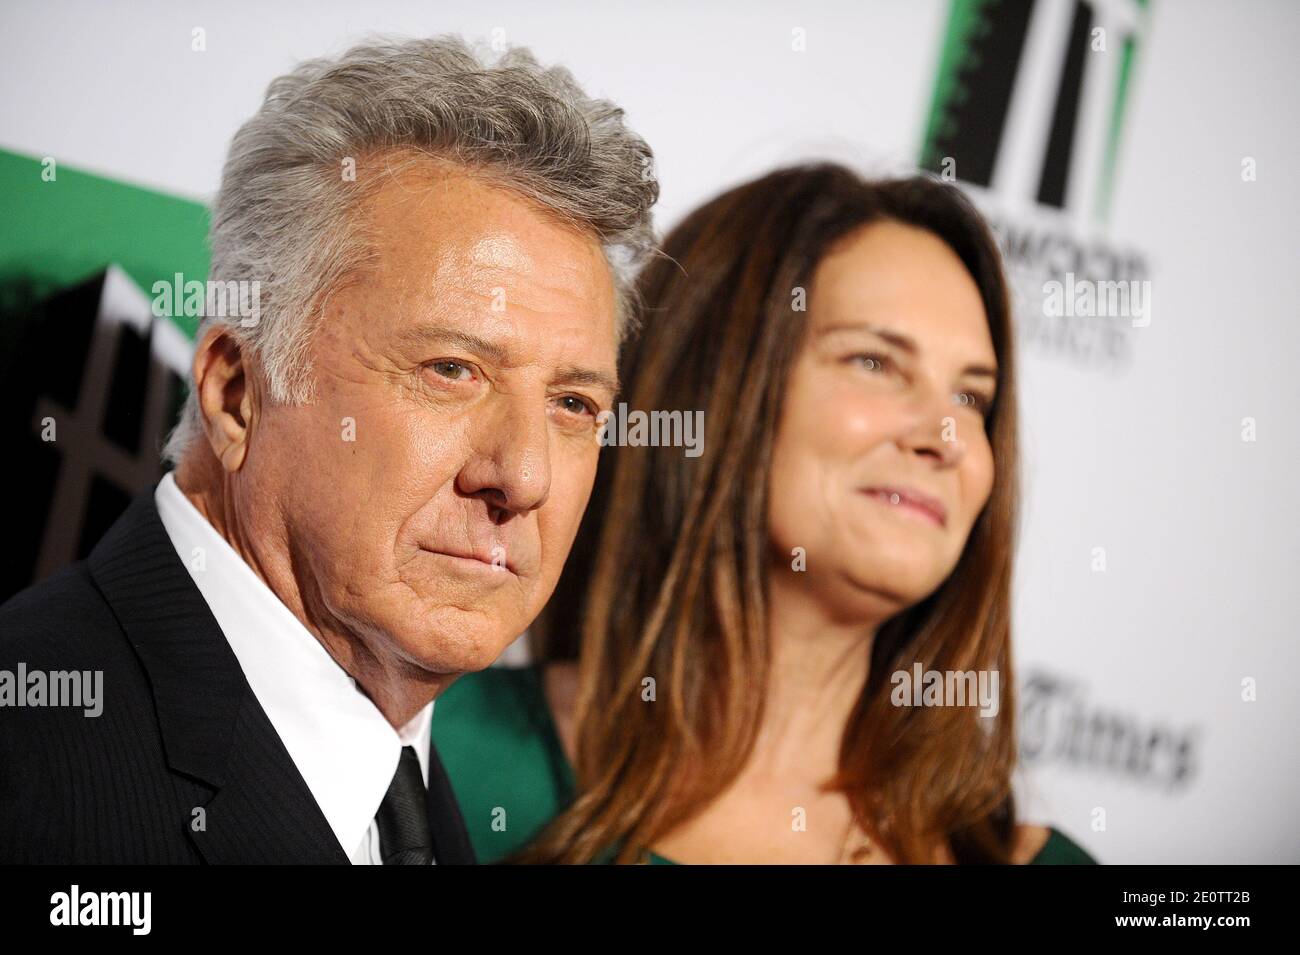 Dustin Hoffman and Anne Byrne Hoffman arrive at the 16th Annual Hollywood Film Awards Gala at The Beverly Hilton Hotel in Los Angeles, CA, USA, October 22, 2012. Photo by Lionel Hahn/ABACAPRESS.COM Stock Photo